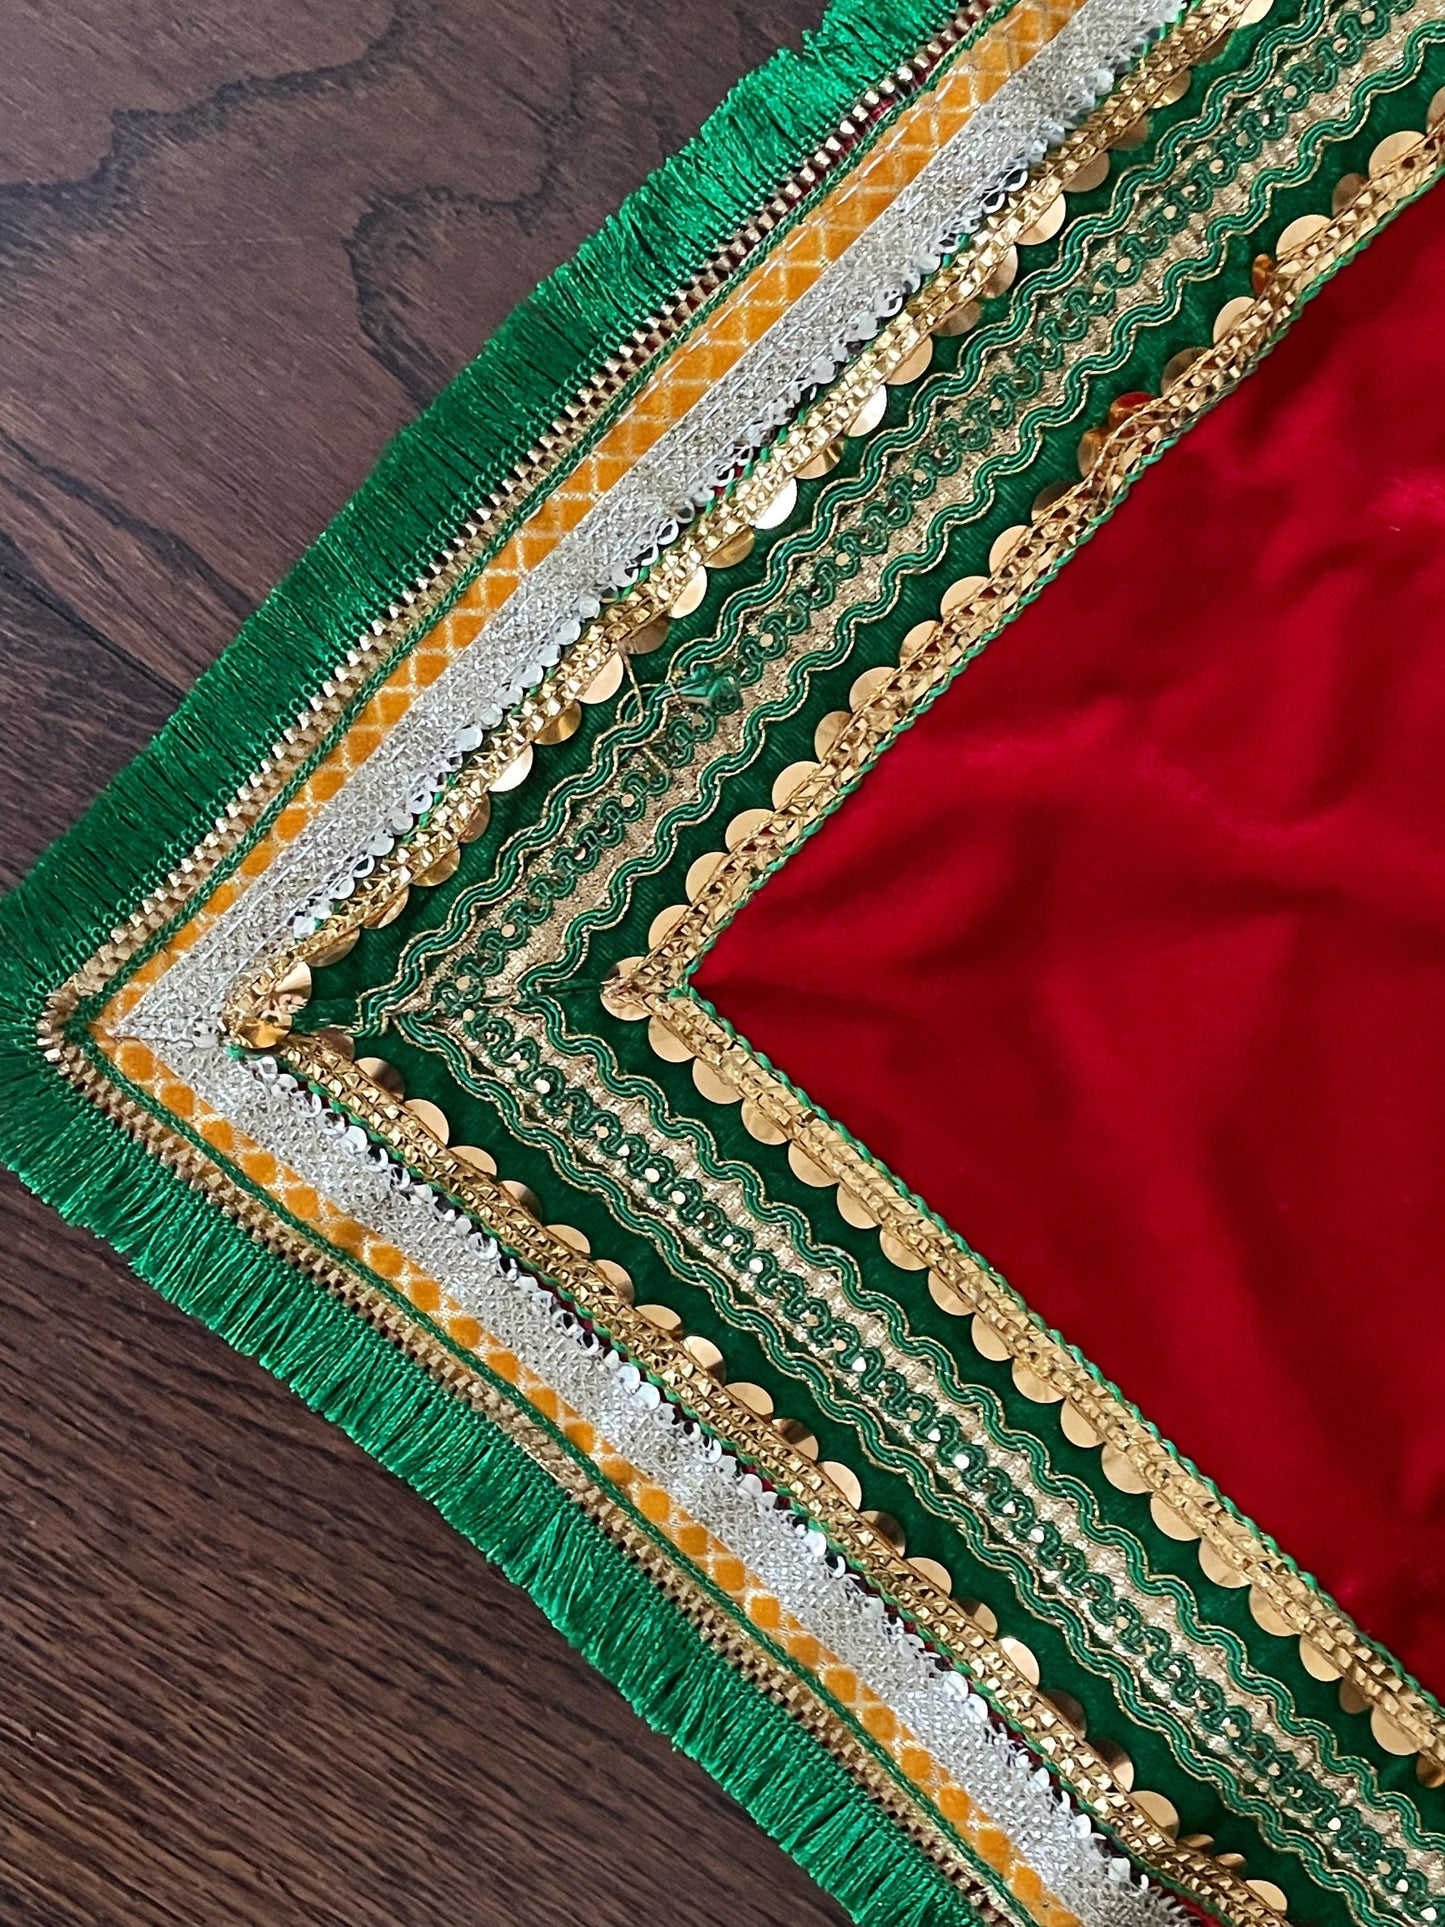 Velvet Pooja Mat Aasan Asan Decorative Cloth for Pooja Room Diwali Navratri Durga Puja Large Square Religious Red-Green and Yellow-Red